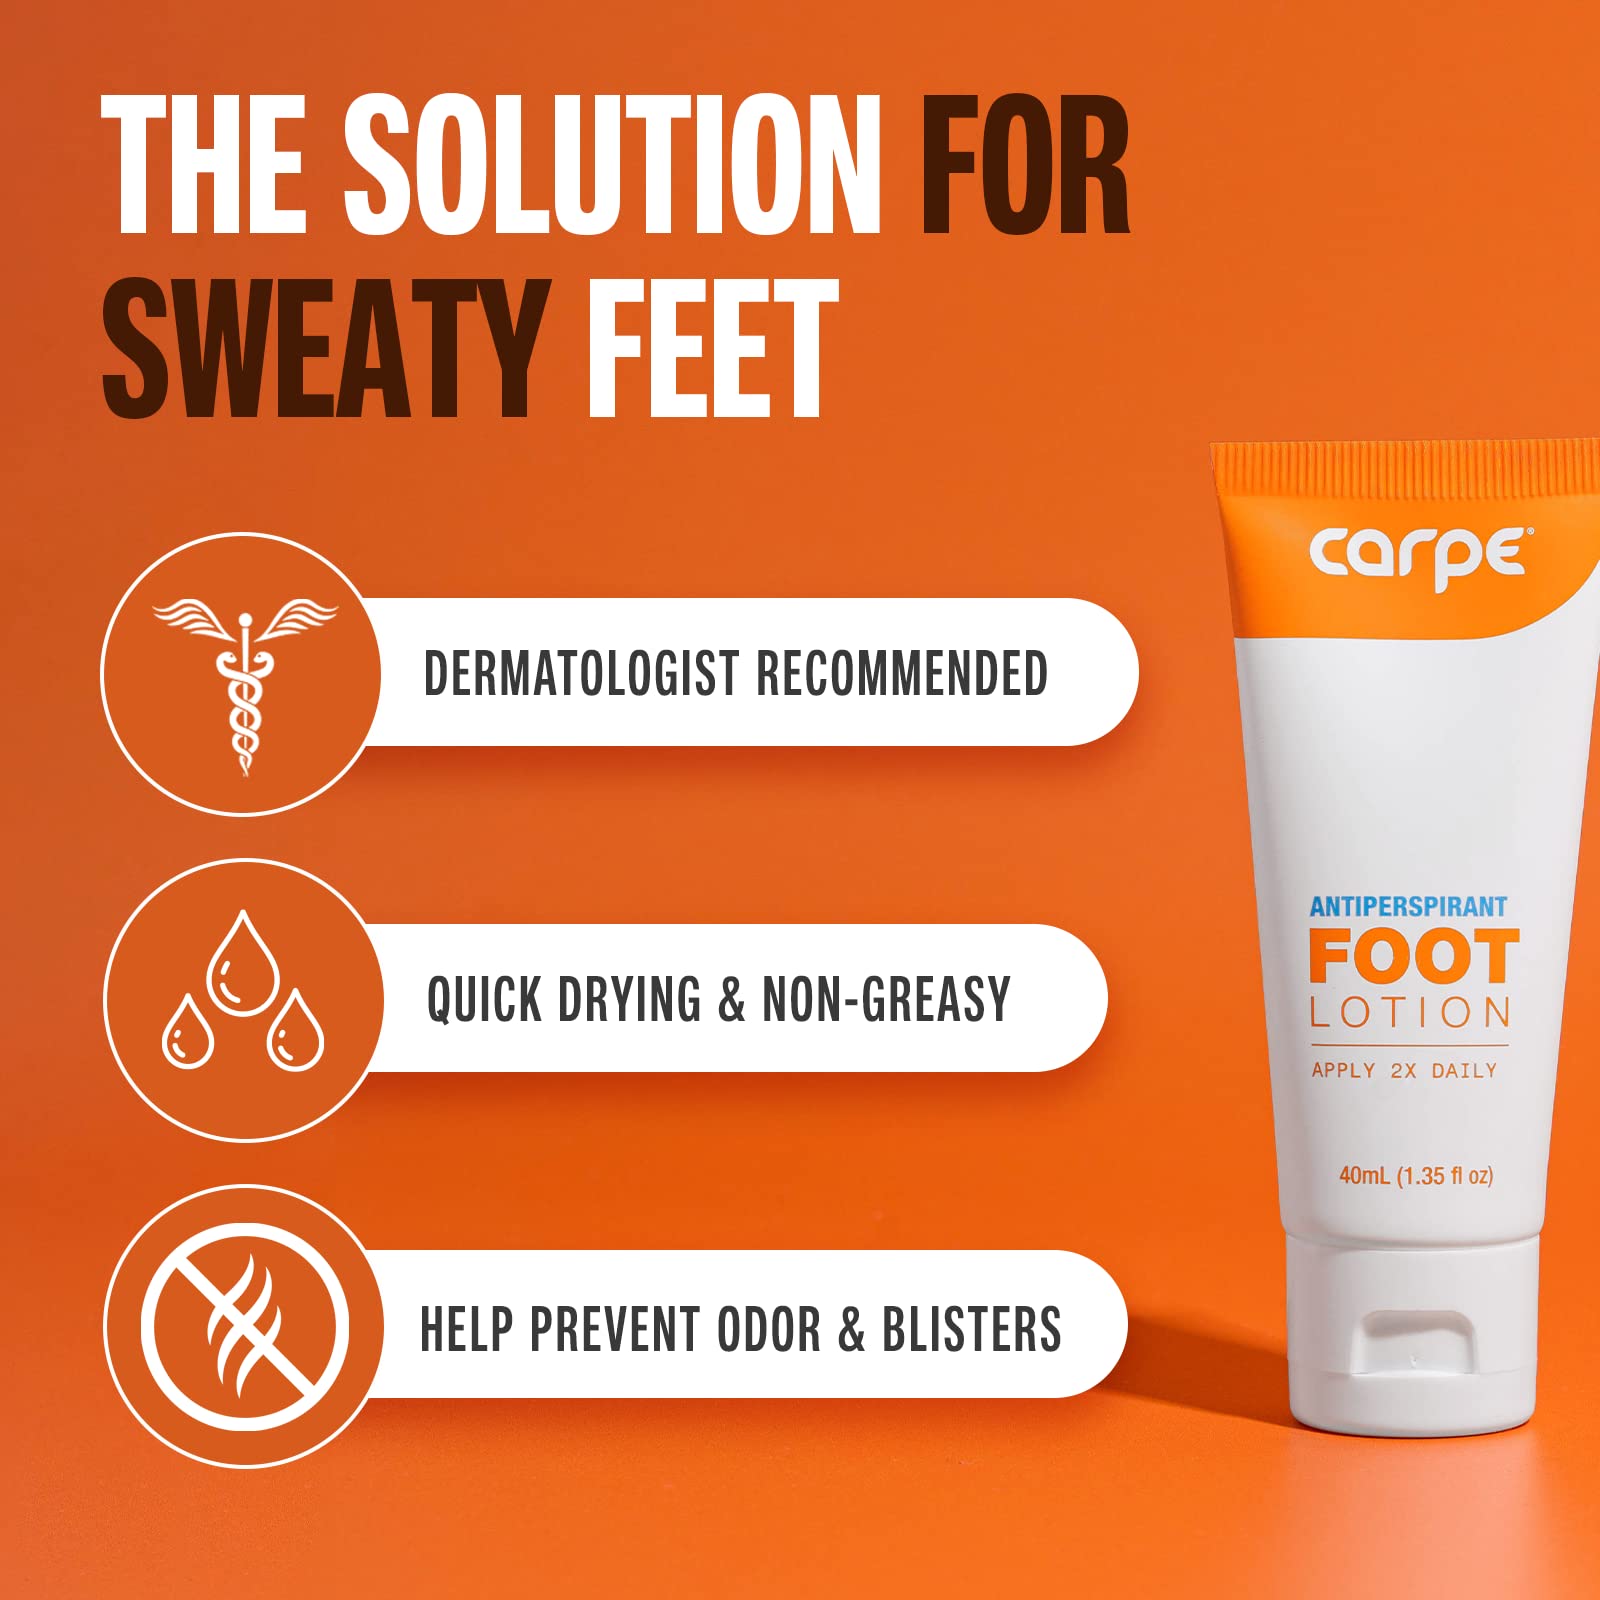 Carpe Antiperspirant Foot Lotion, A dermatologist-recommended solution to stop sweaty, smelly feet, Helps prevent blisters, Grea